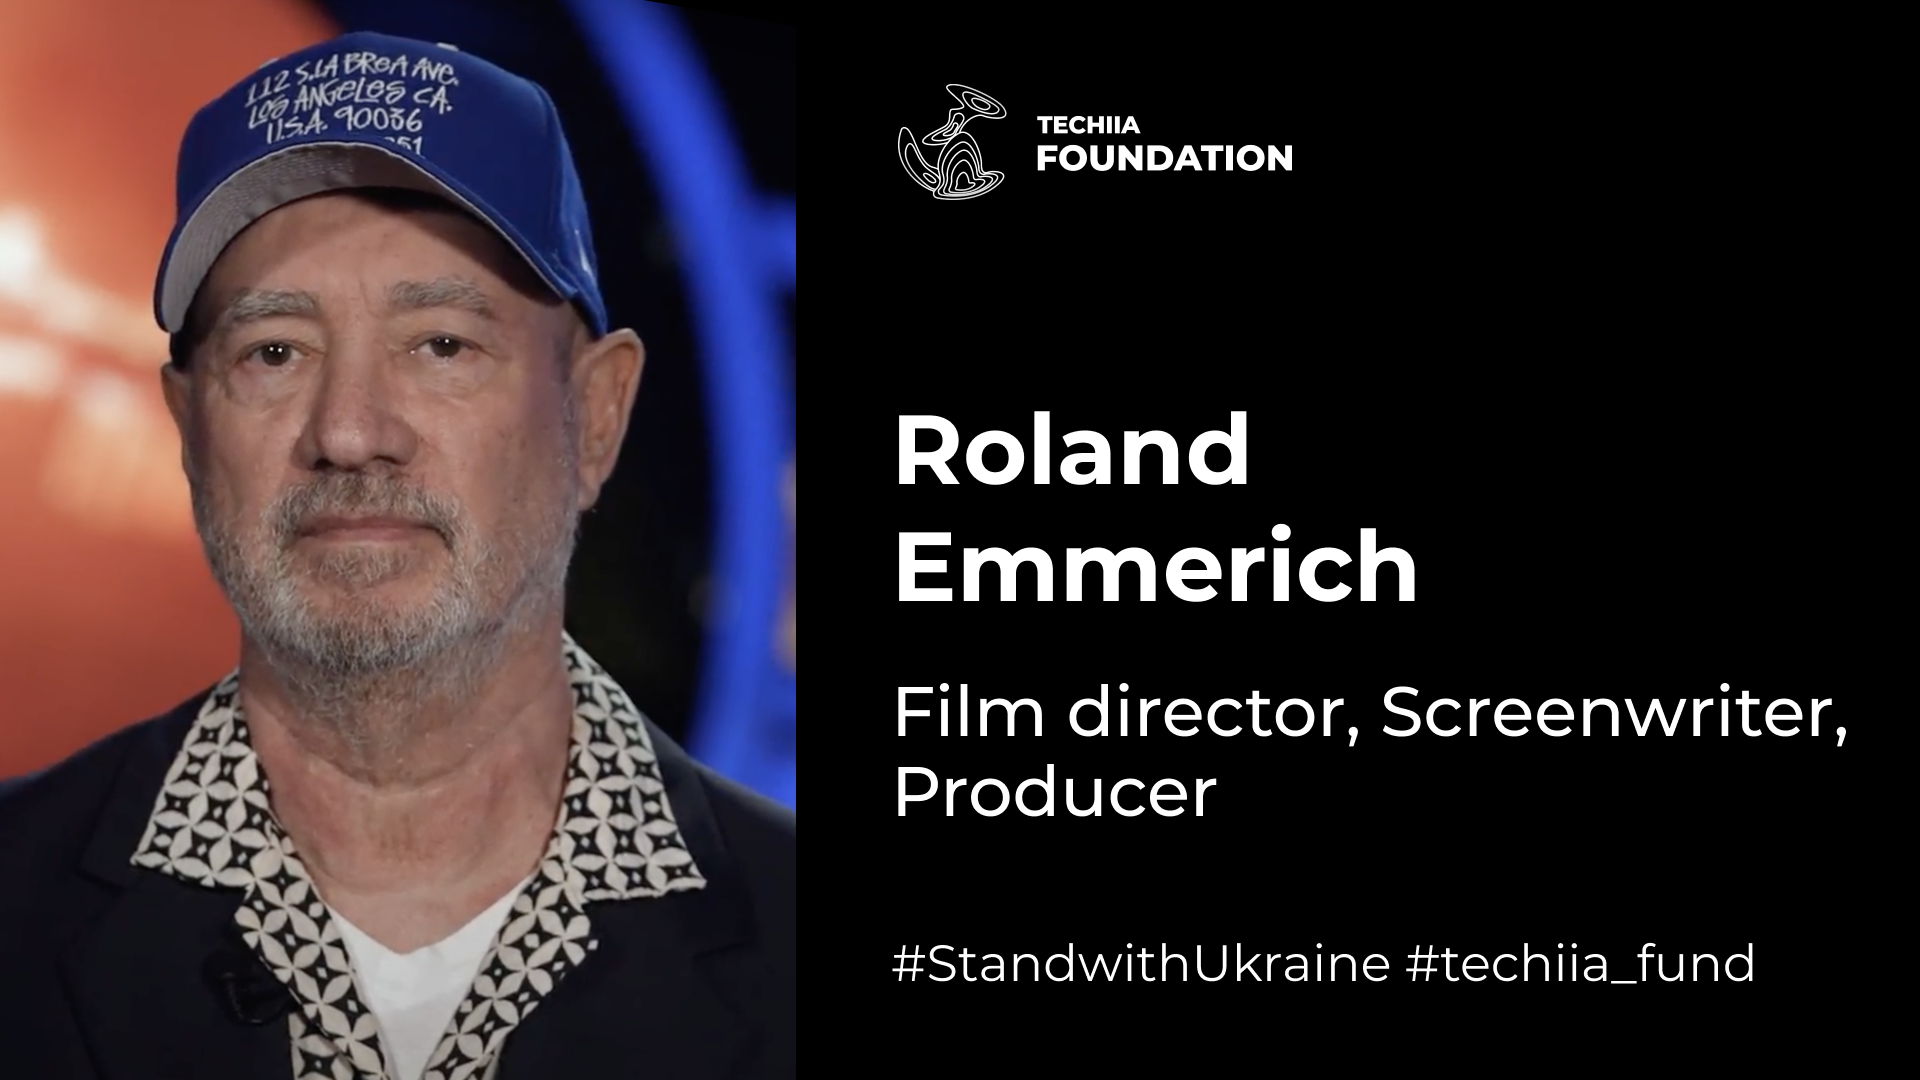 Hollywood Director Roland Emmerich made his statement in support of Ukraine on WePlay Esports Arena L.A. | TECHIIA Holding